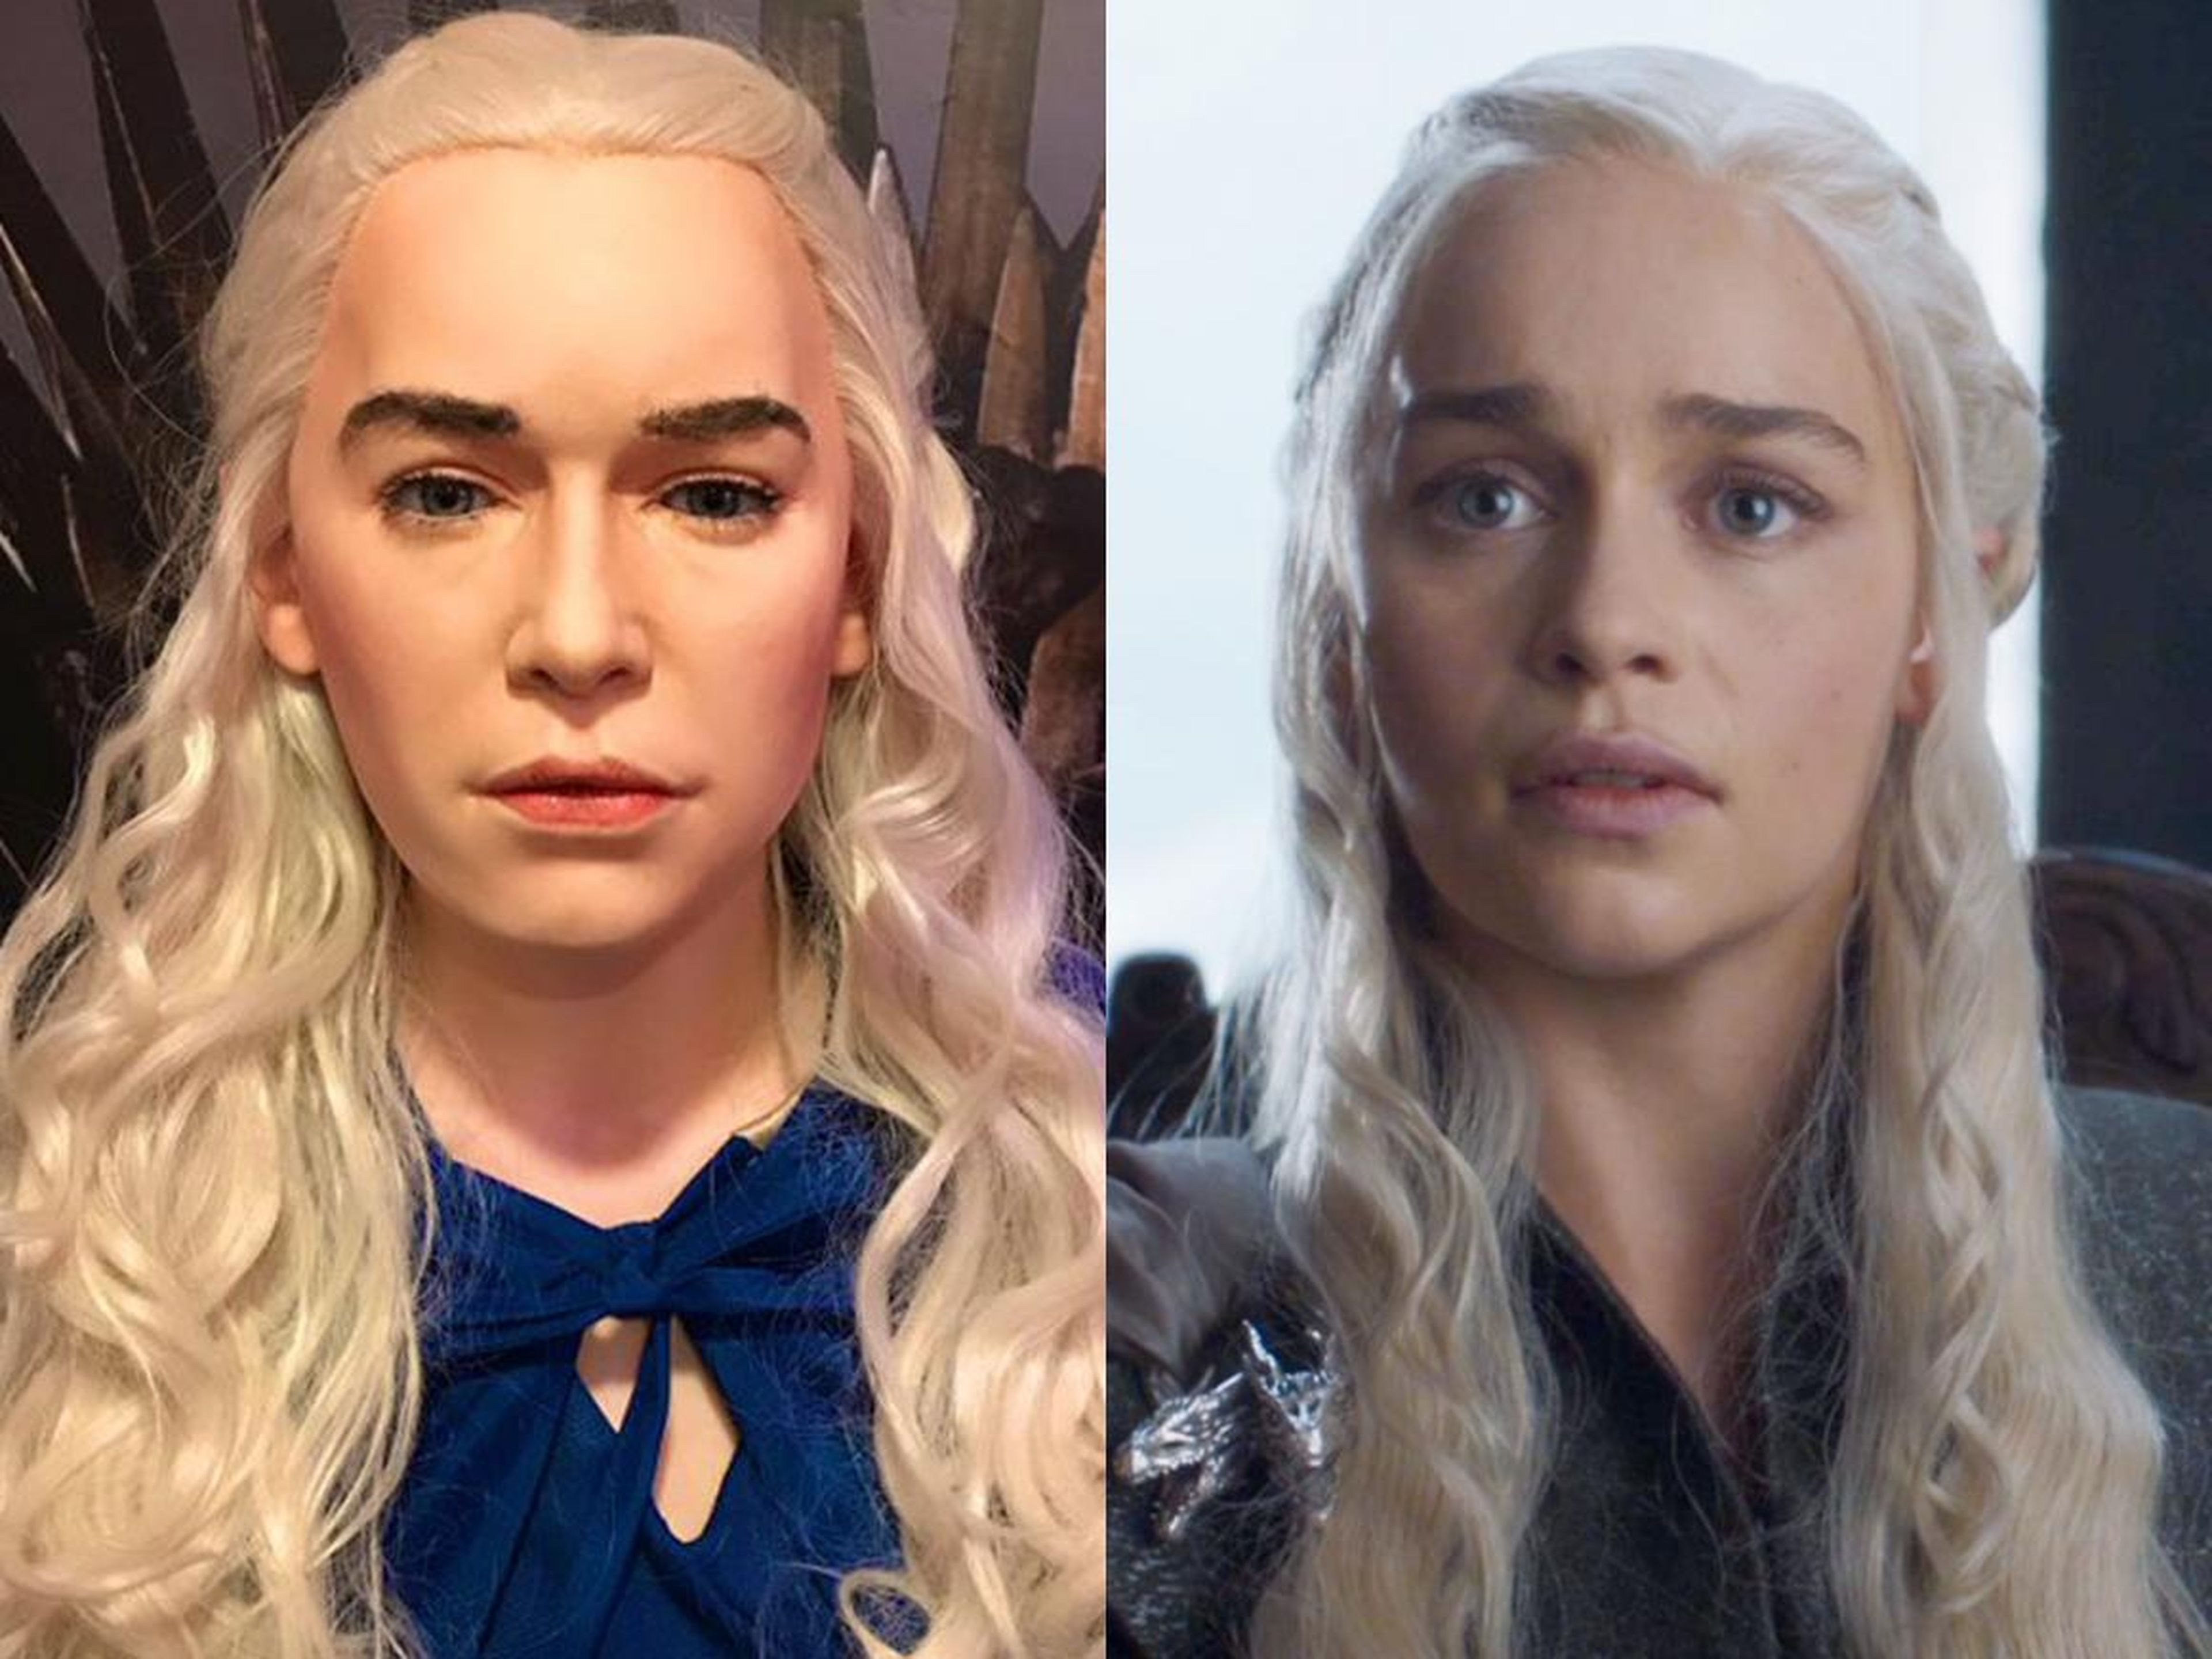 Emilia Clarke's wax figure, inspired by her iconic "Game of Thrones" character, isn't accurate.